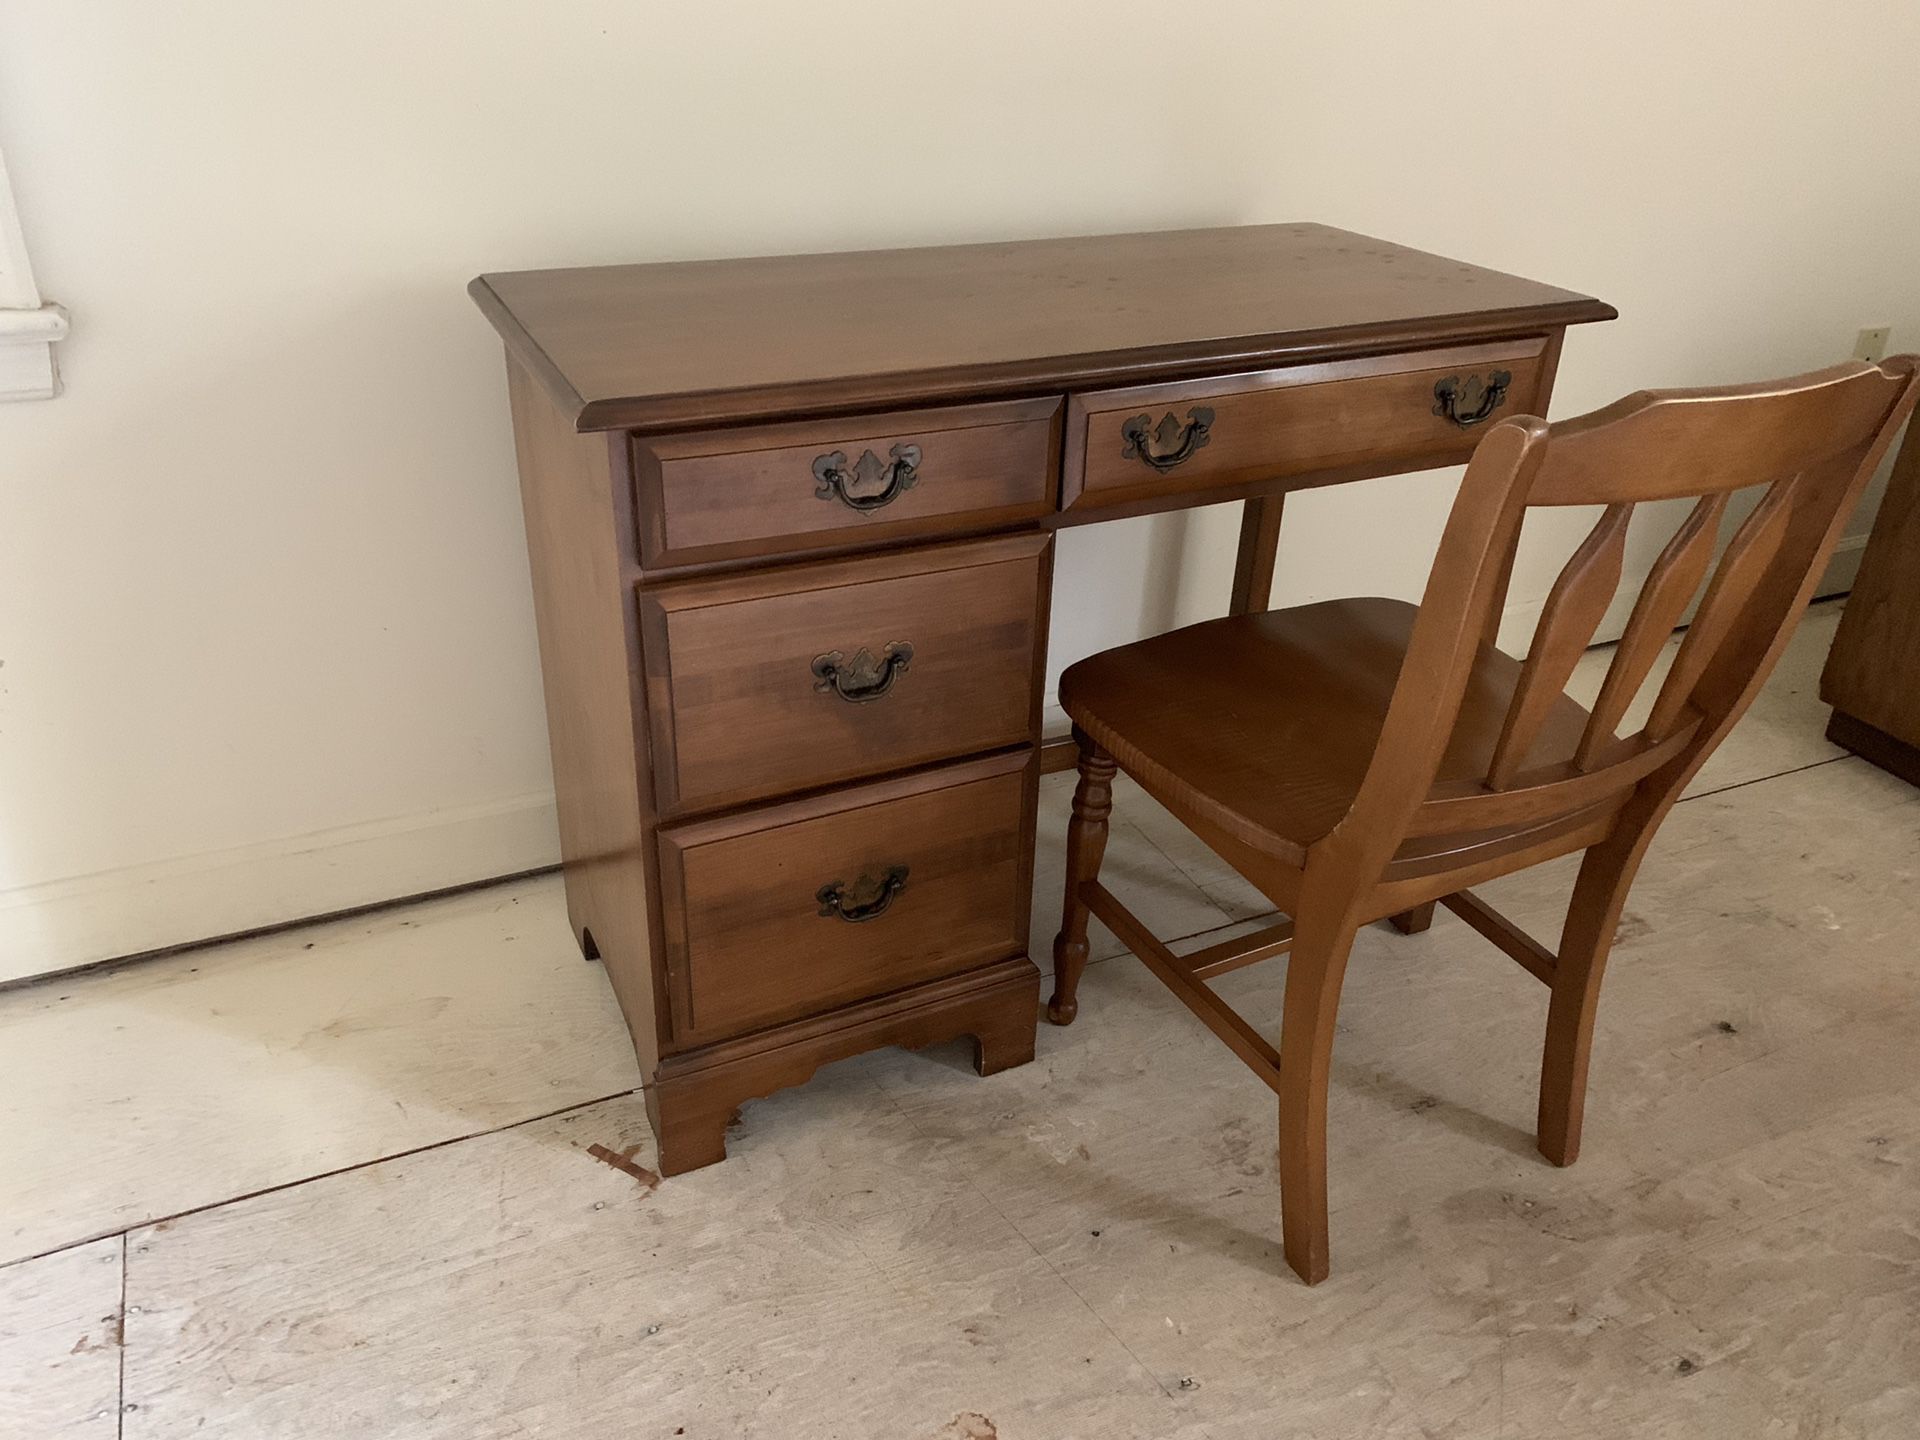 Maple Wood Desk and Chair Set and Bookshelf